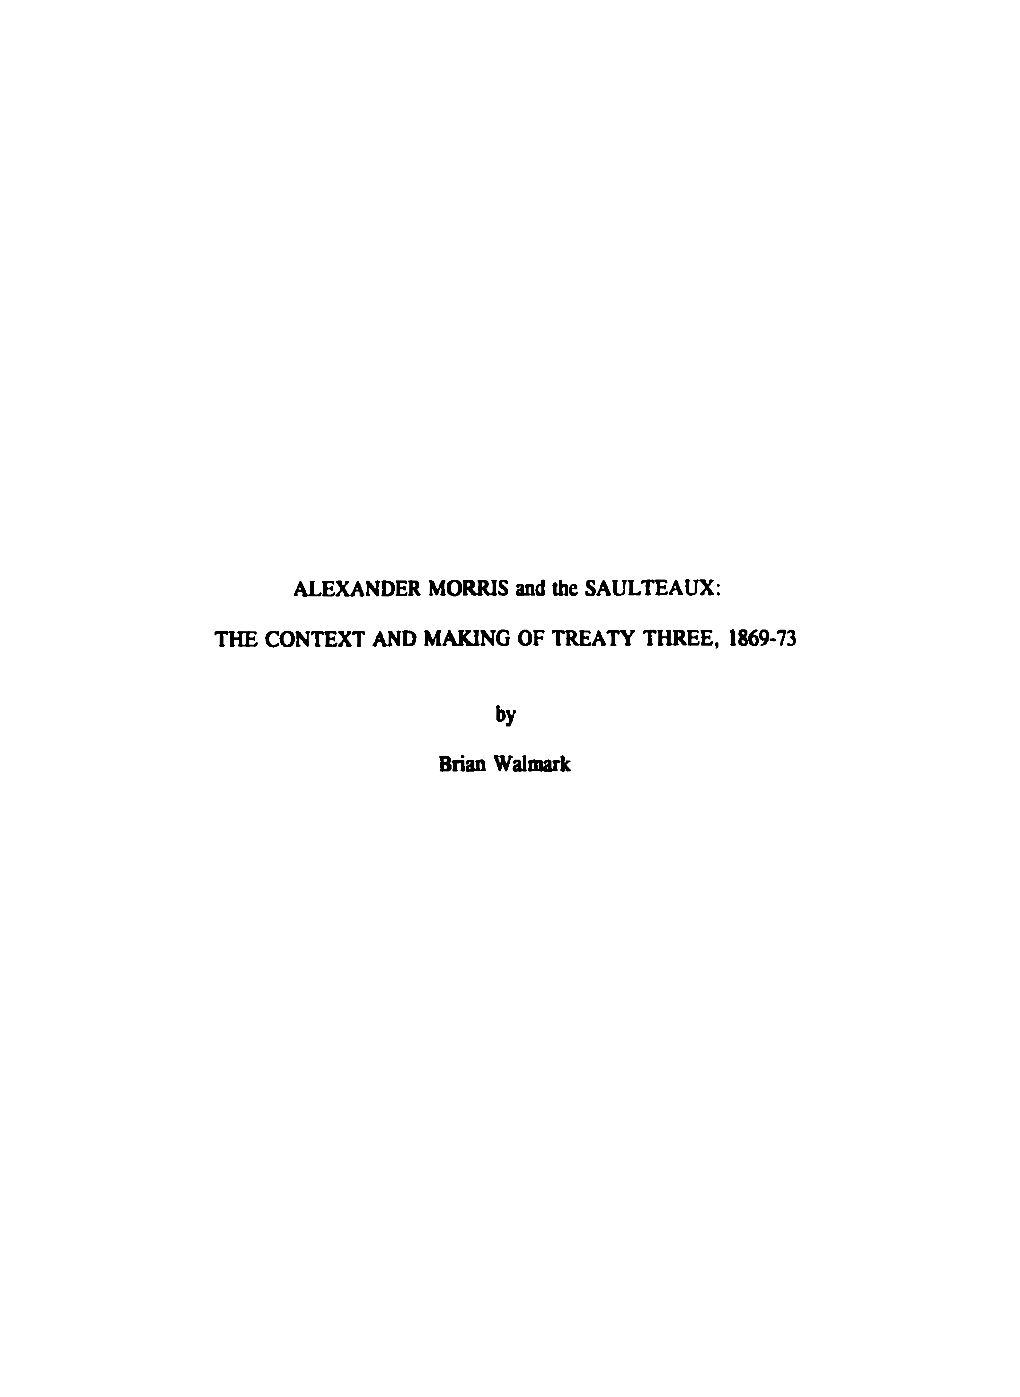 ALEXANDER Morrls and the SAULTEAUX: the CONTEXT and MAKING of TREATY THREE, 1869-73